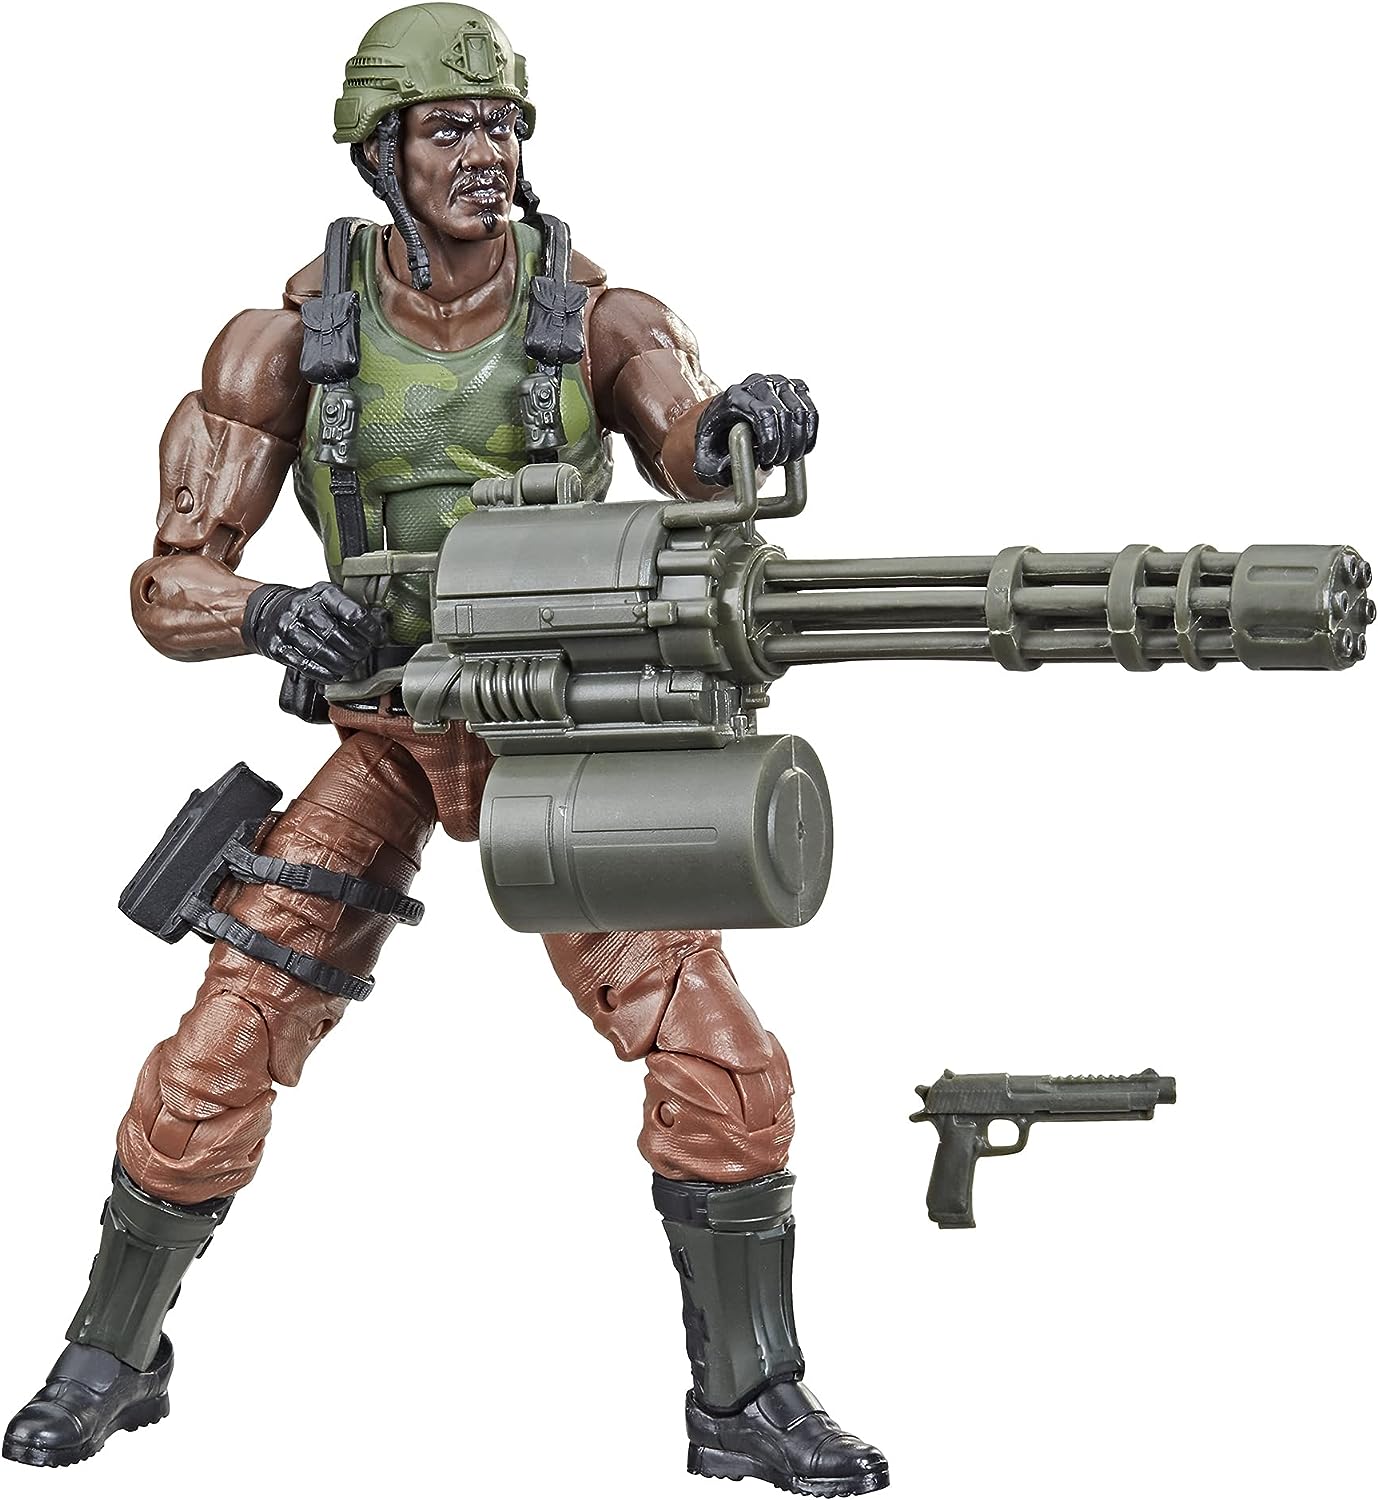 G.I. Joe Classified Series Heavy Artilery Roadblock Action Figure 28 Collectible Premium Toy 6-Inch-Scale with Custom Package Art (Amazon Exclusive)